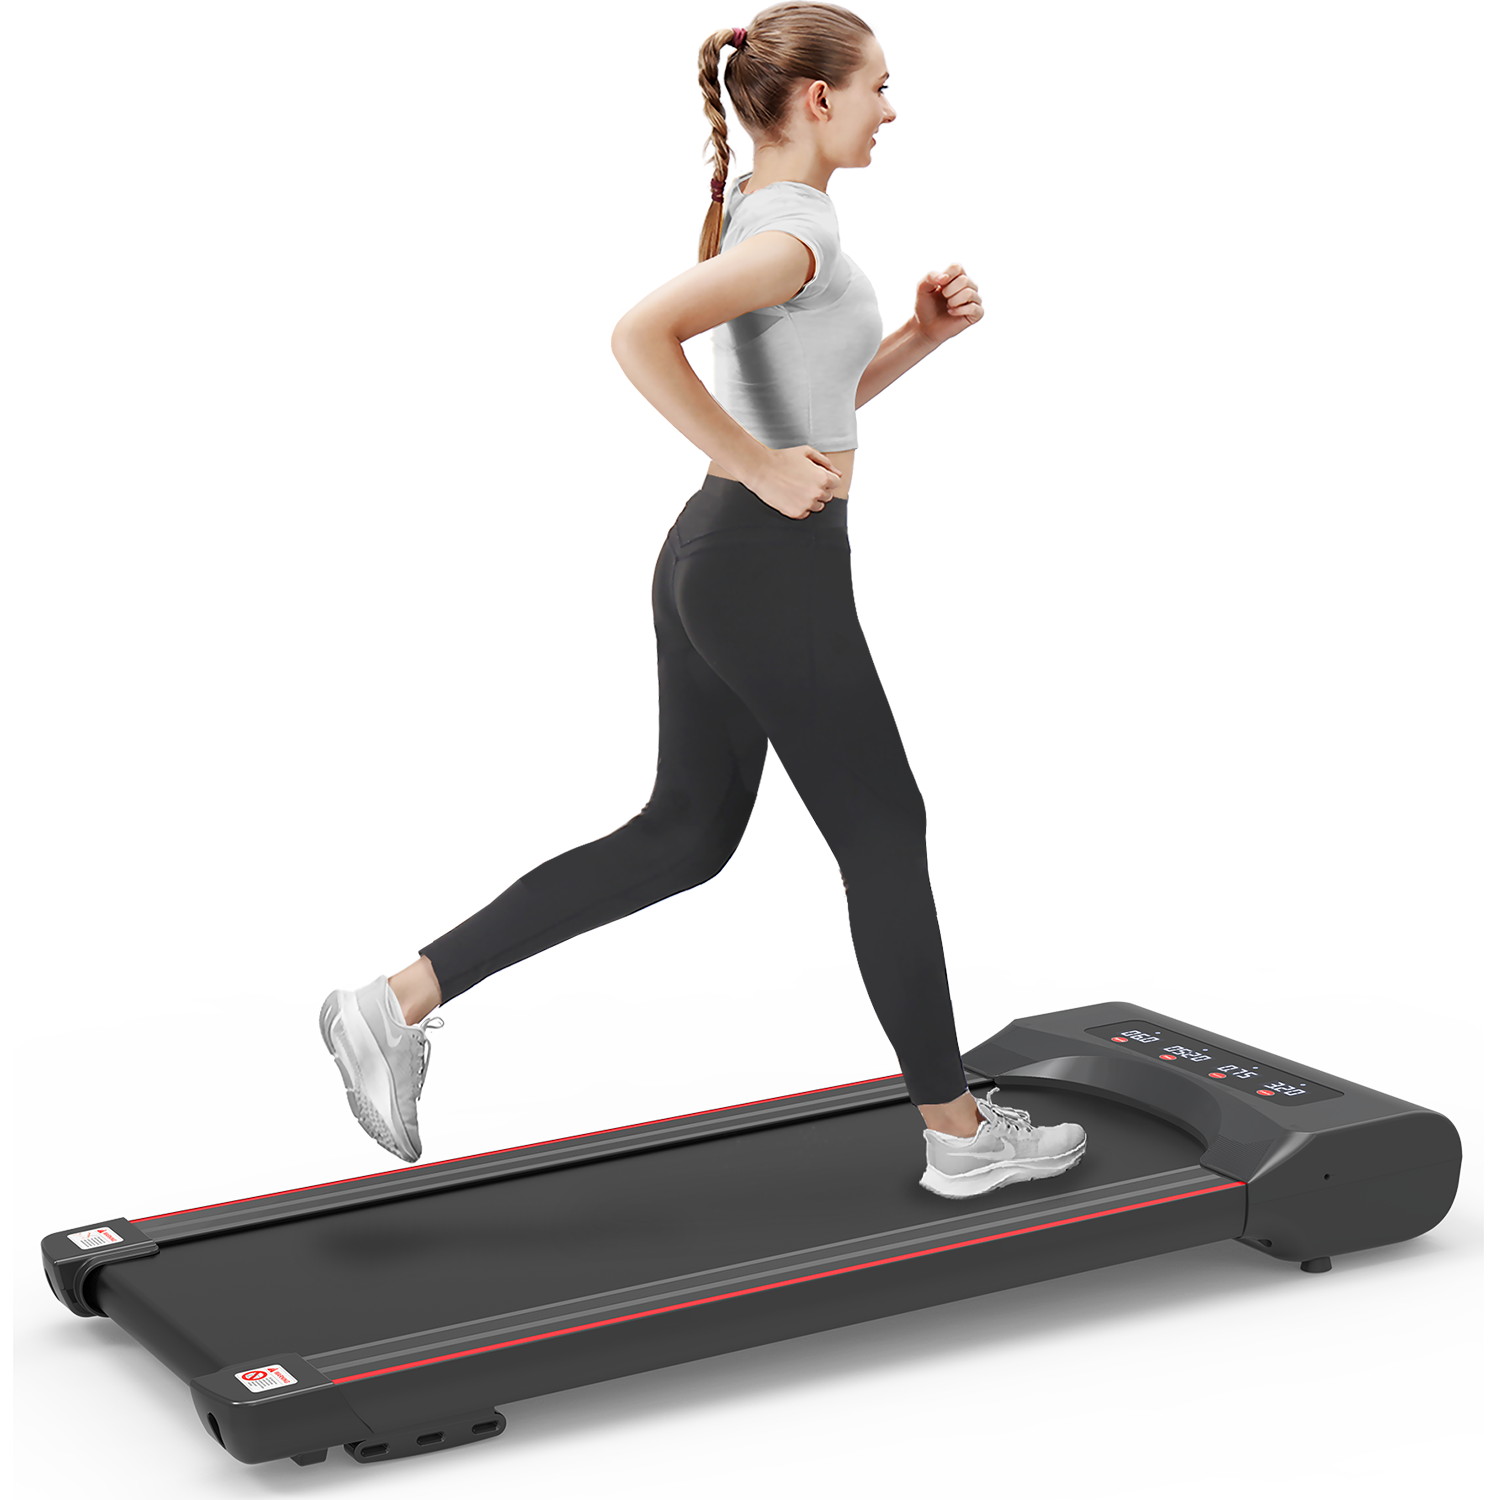 Under Desk Treadmill Machine 300 Lb Capacity Walking Pad for Home Office